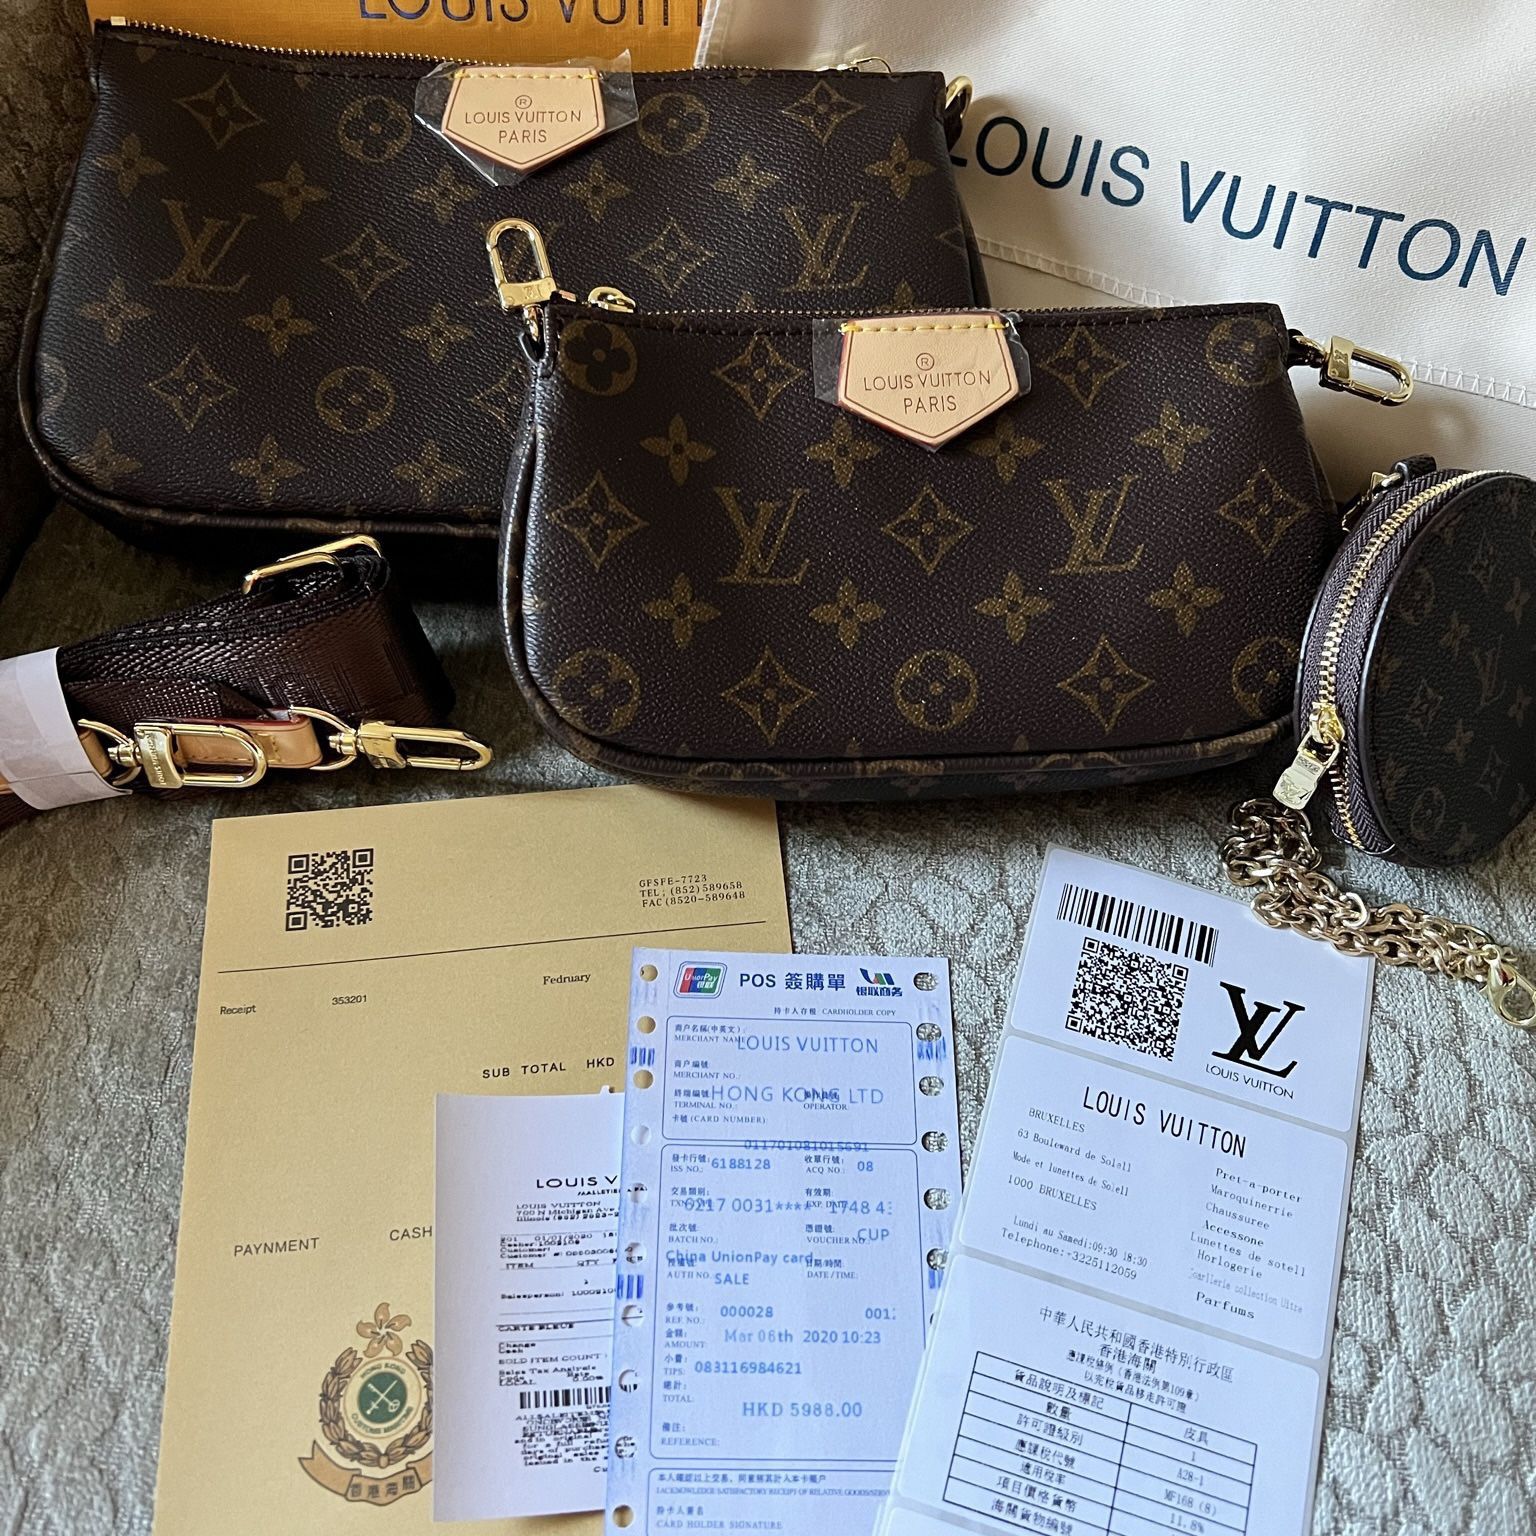 LV 3 Piece Purse/shoulder Bag With Matching Beanie for Sale in